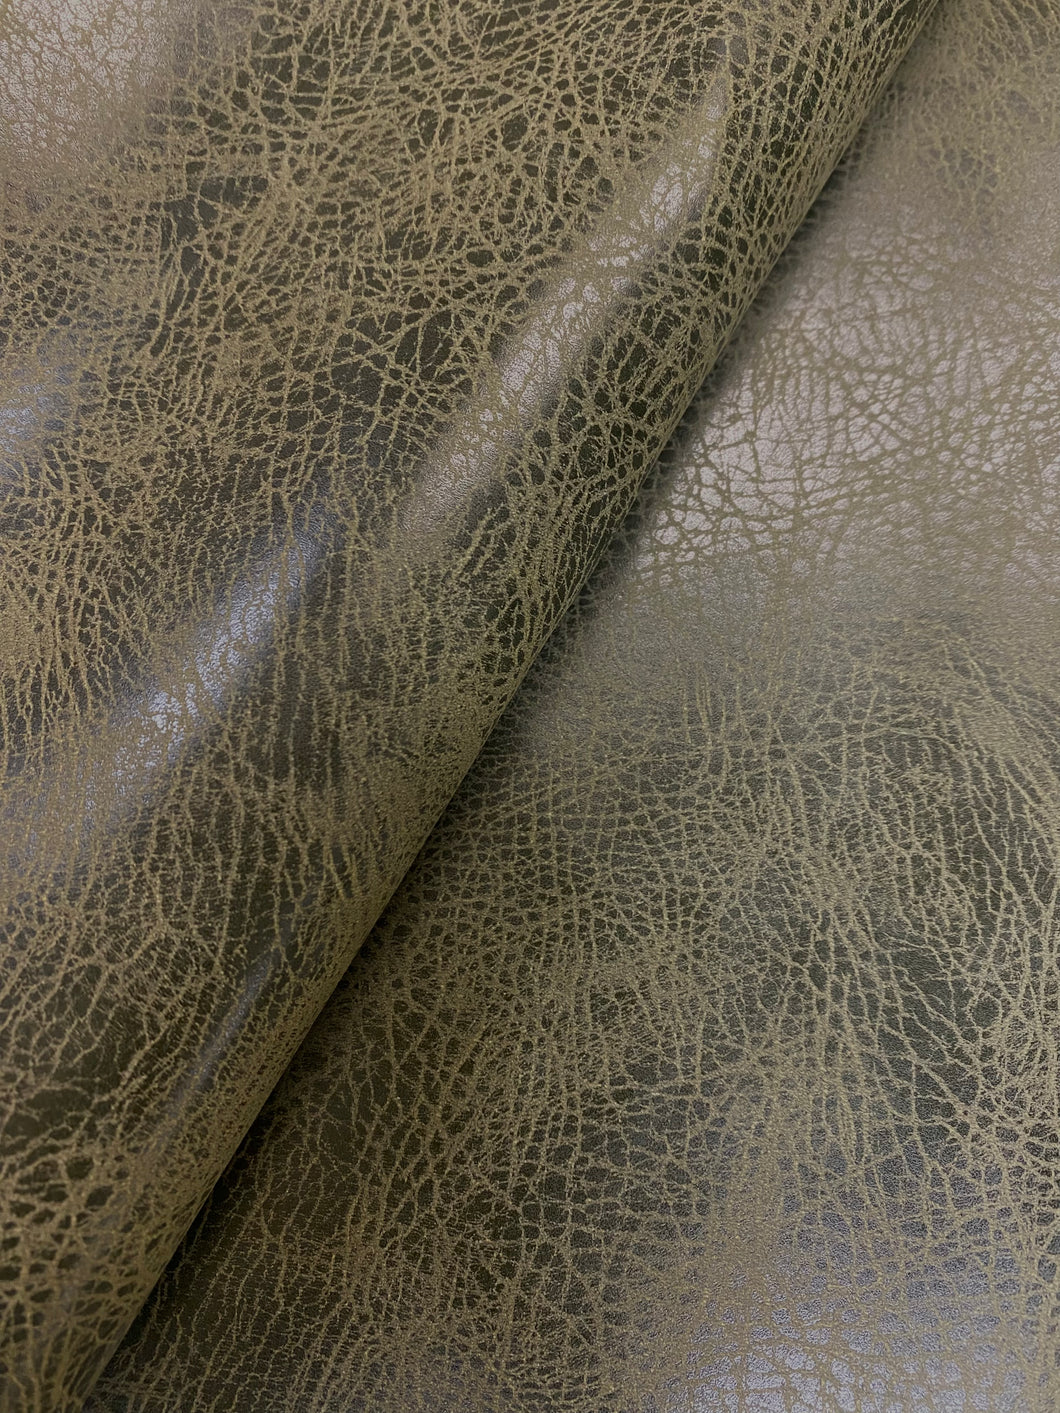 Upholstery Metallic Faux Leather Silver